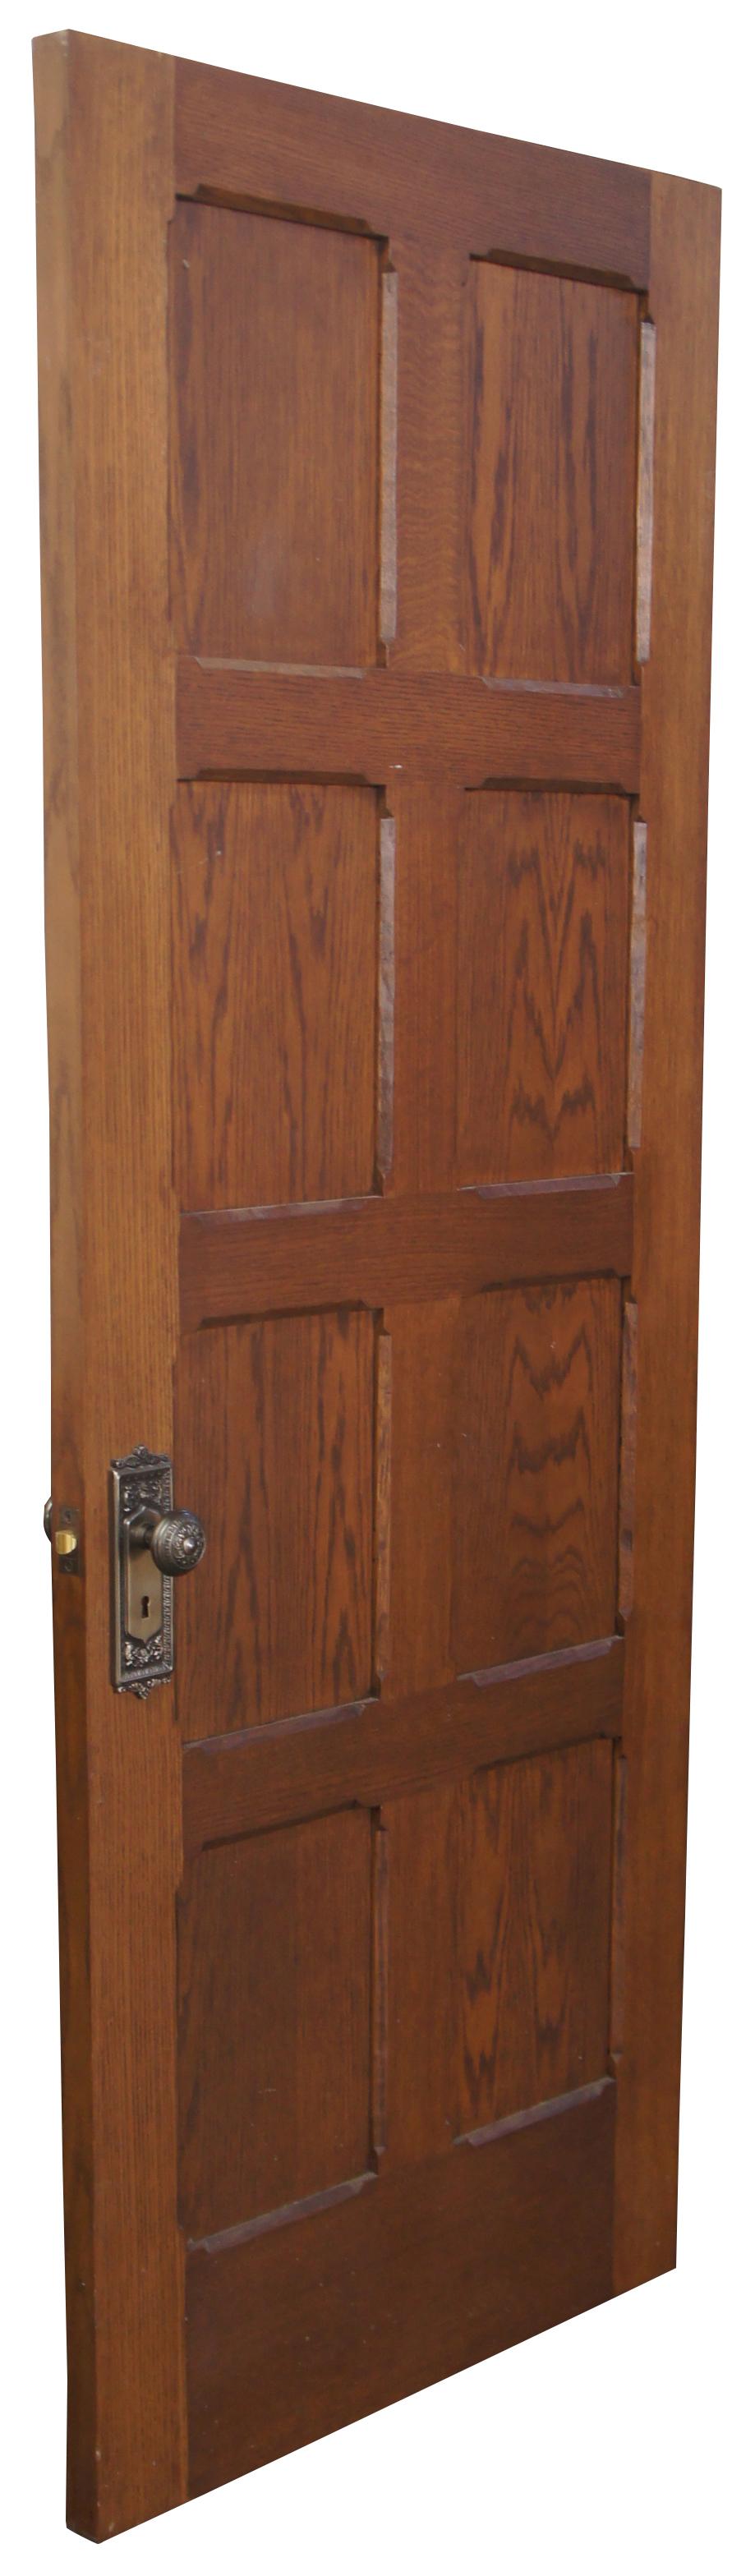 Vintage oak panel door. Features eight panels in a grid pattern with Spanish Revival design. Measures: 32” x 84”.
  